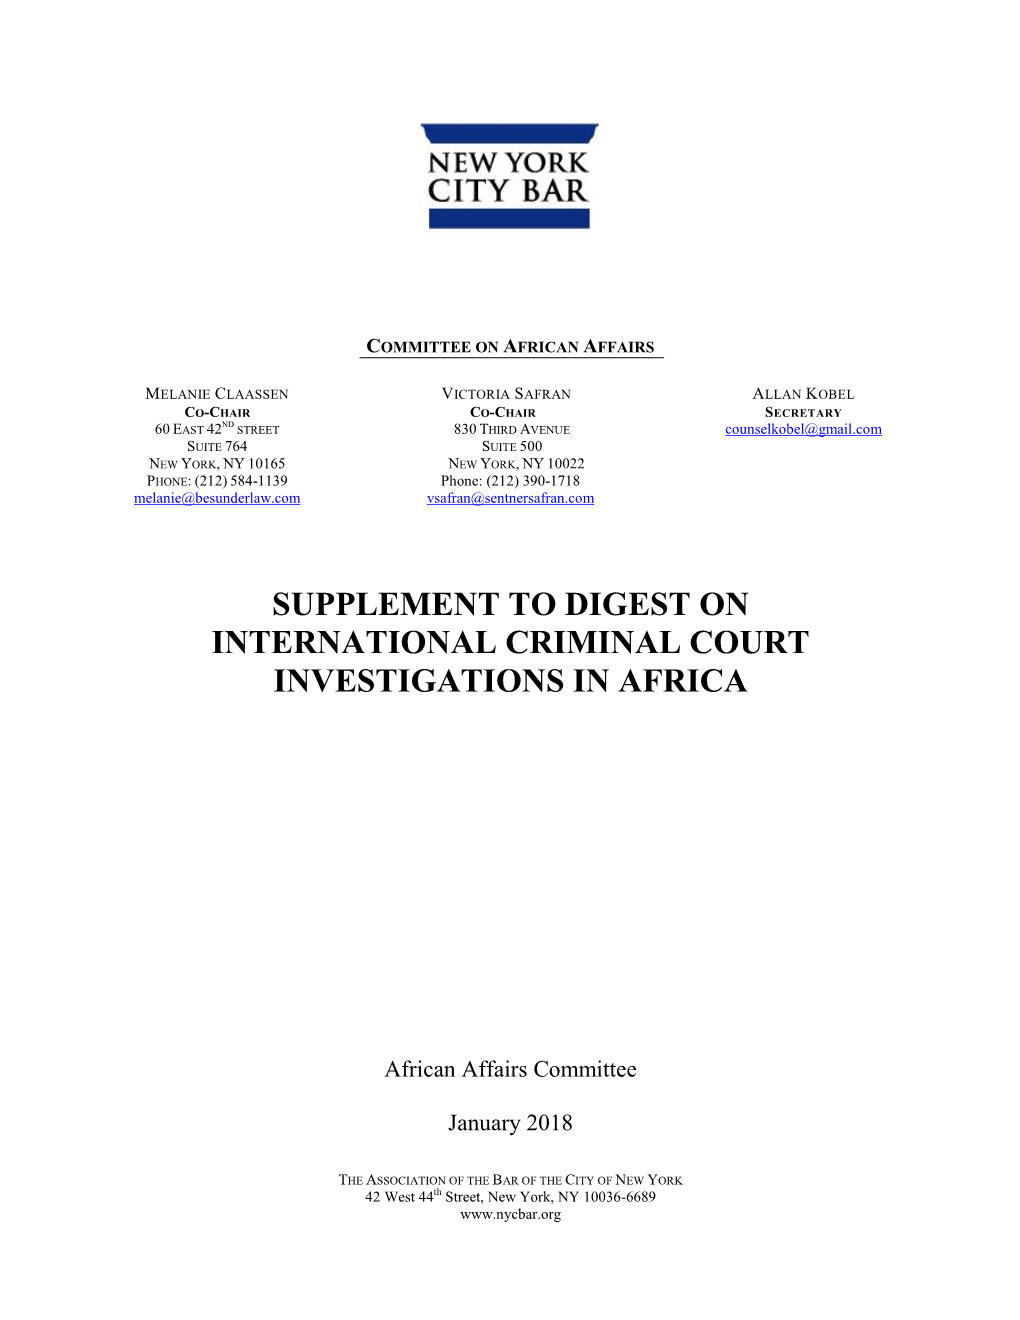 Supplement to Digest on International Criminal Court Investigations in Africa